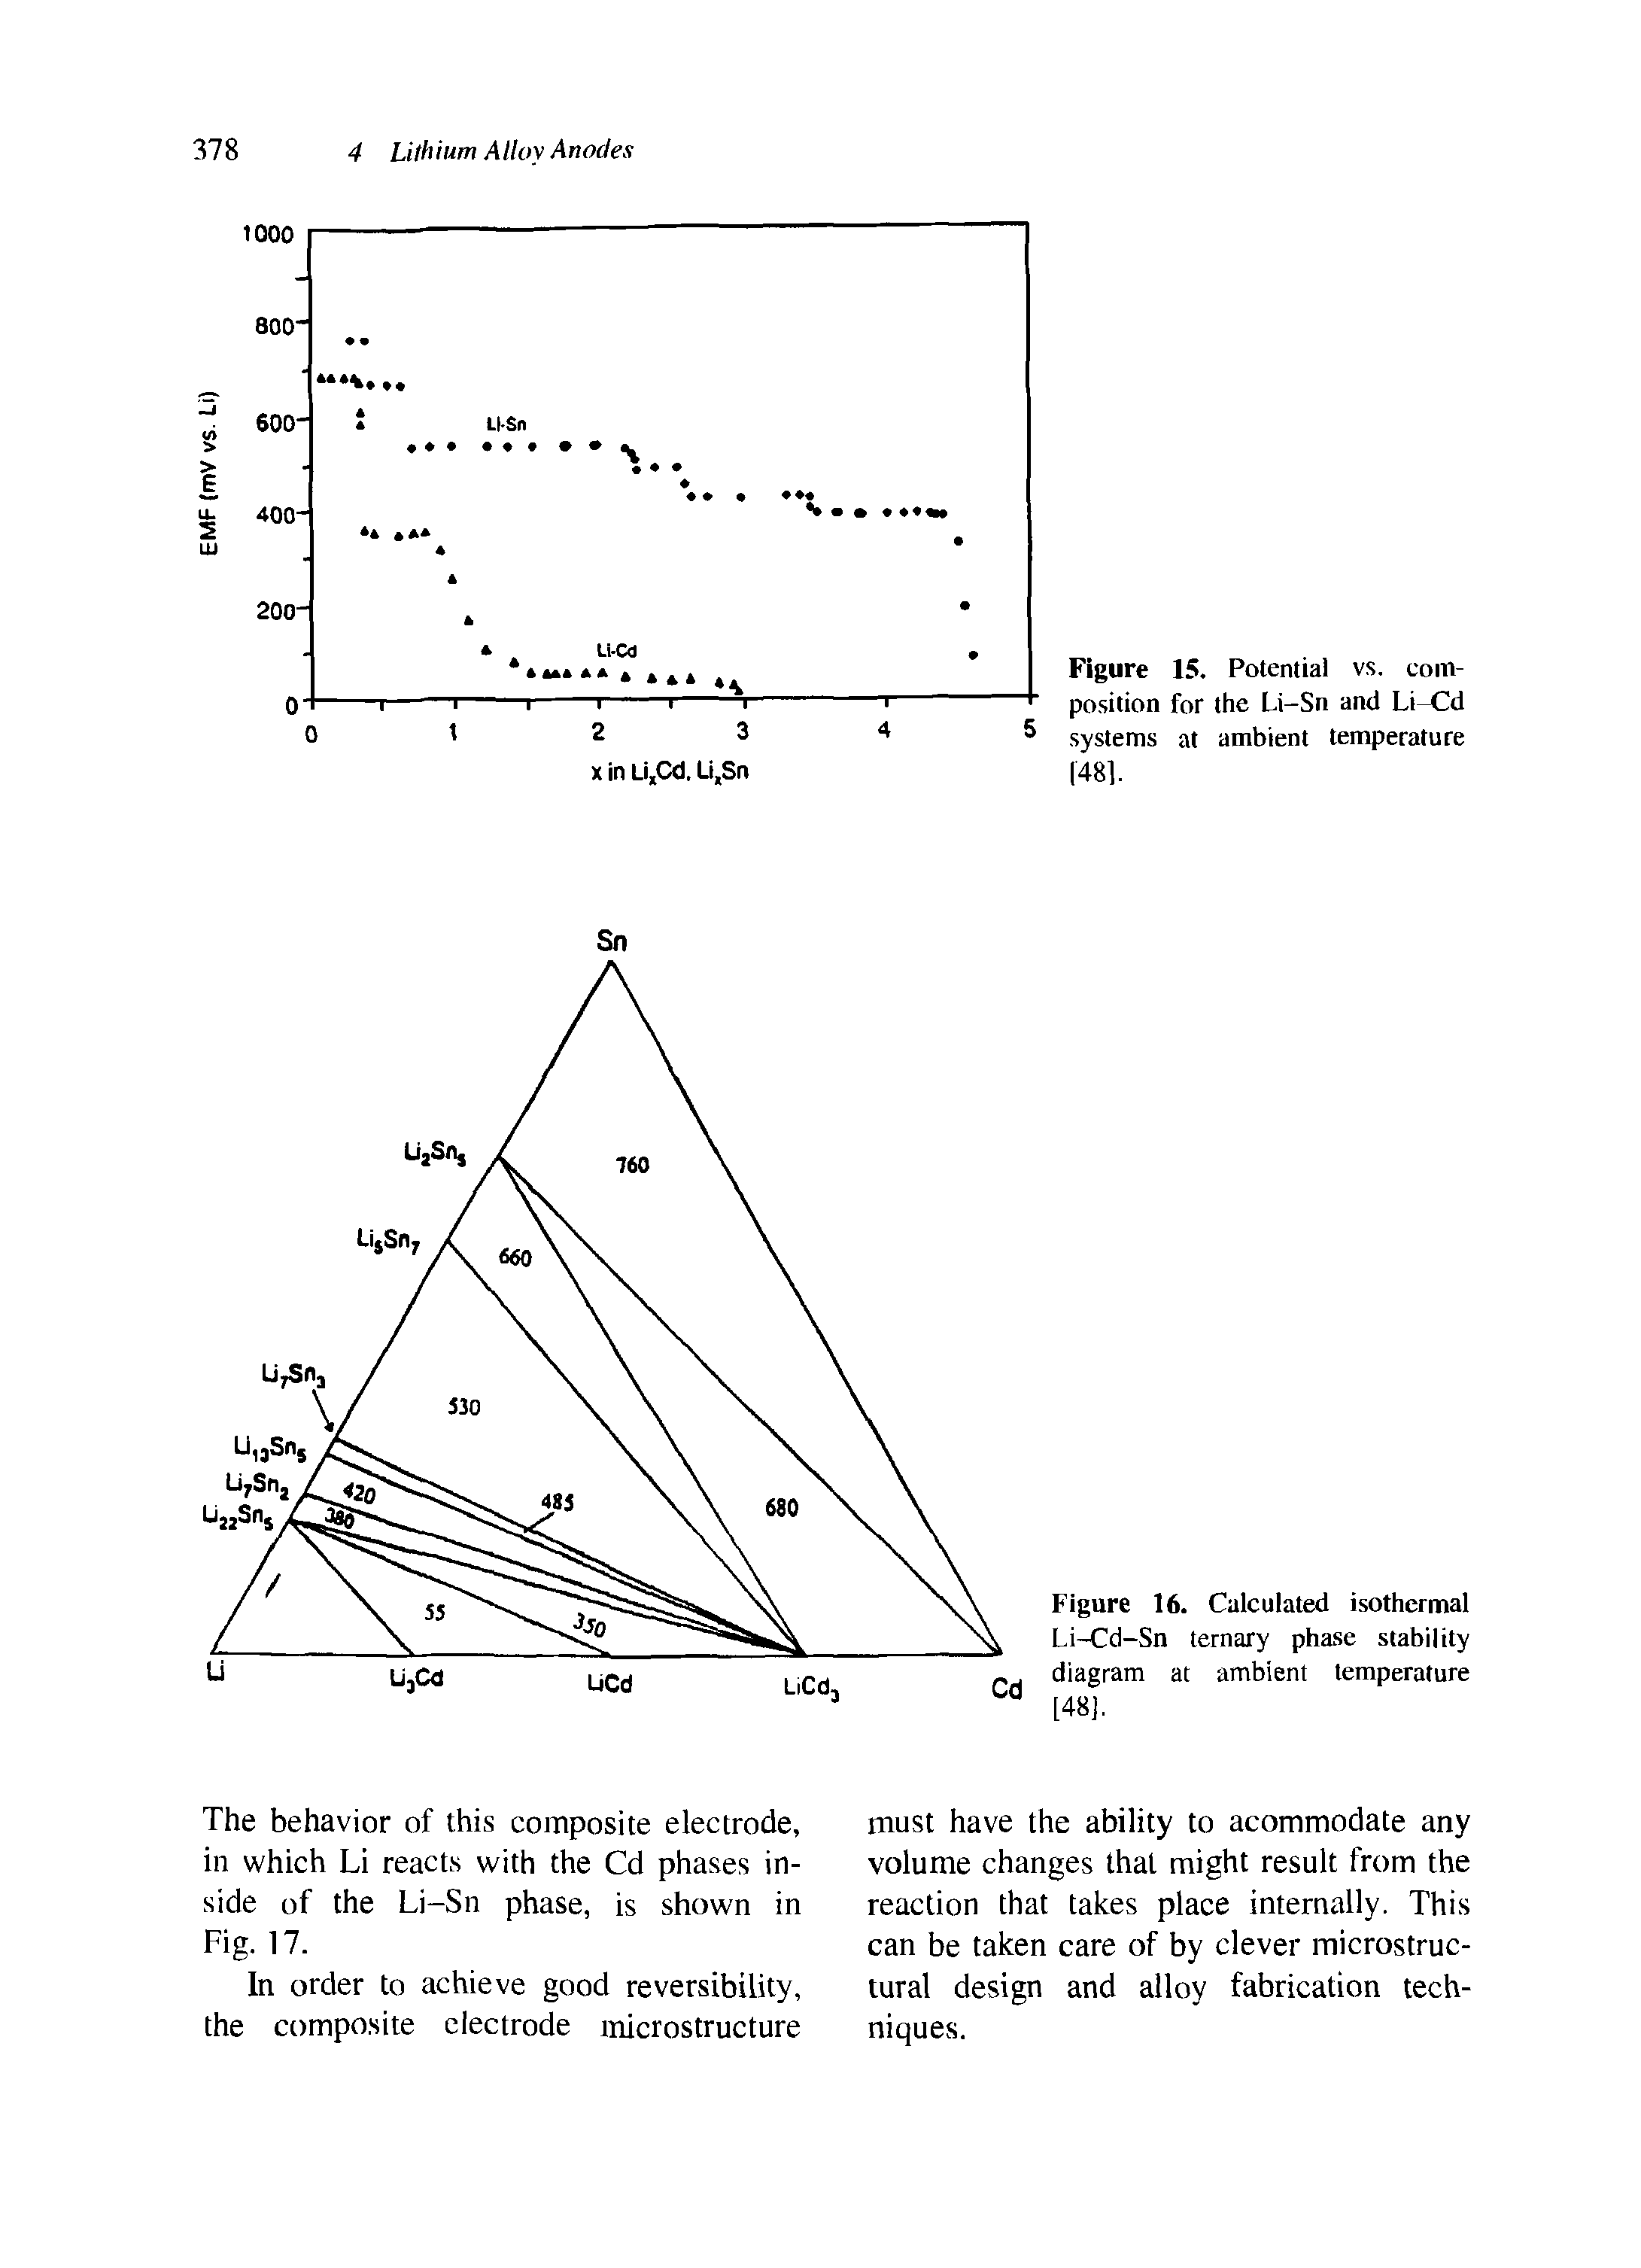 Figure 16. Calculated isothermal Li-Cd-Sn ternary phase stability diagram at ambient temperature [48],...